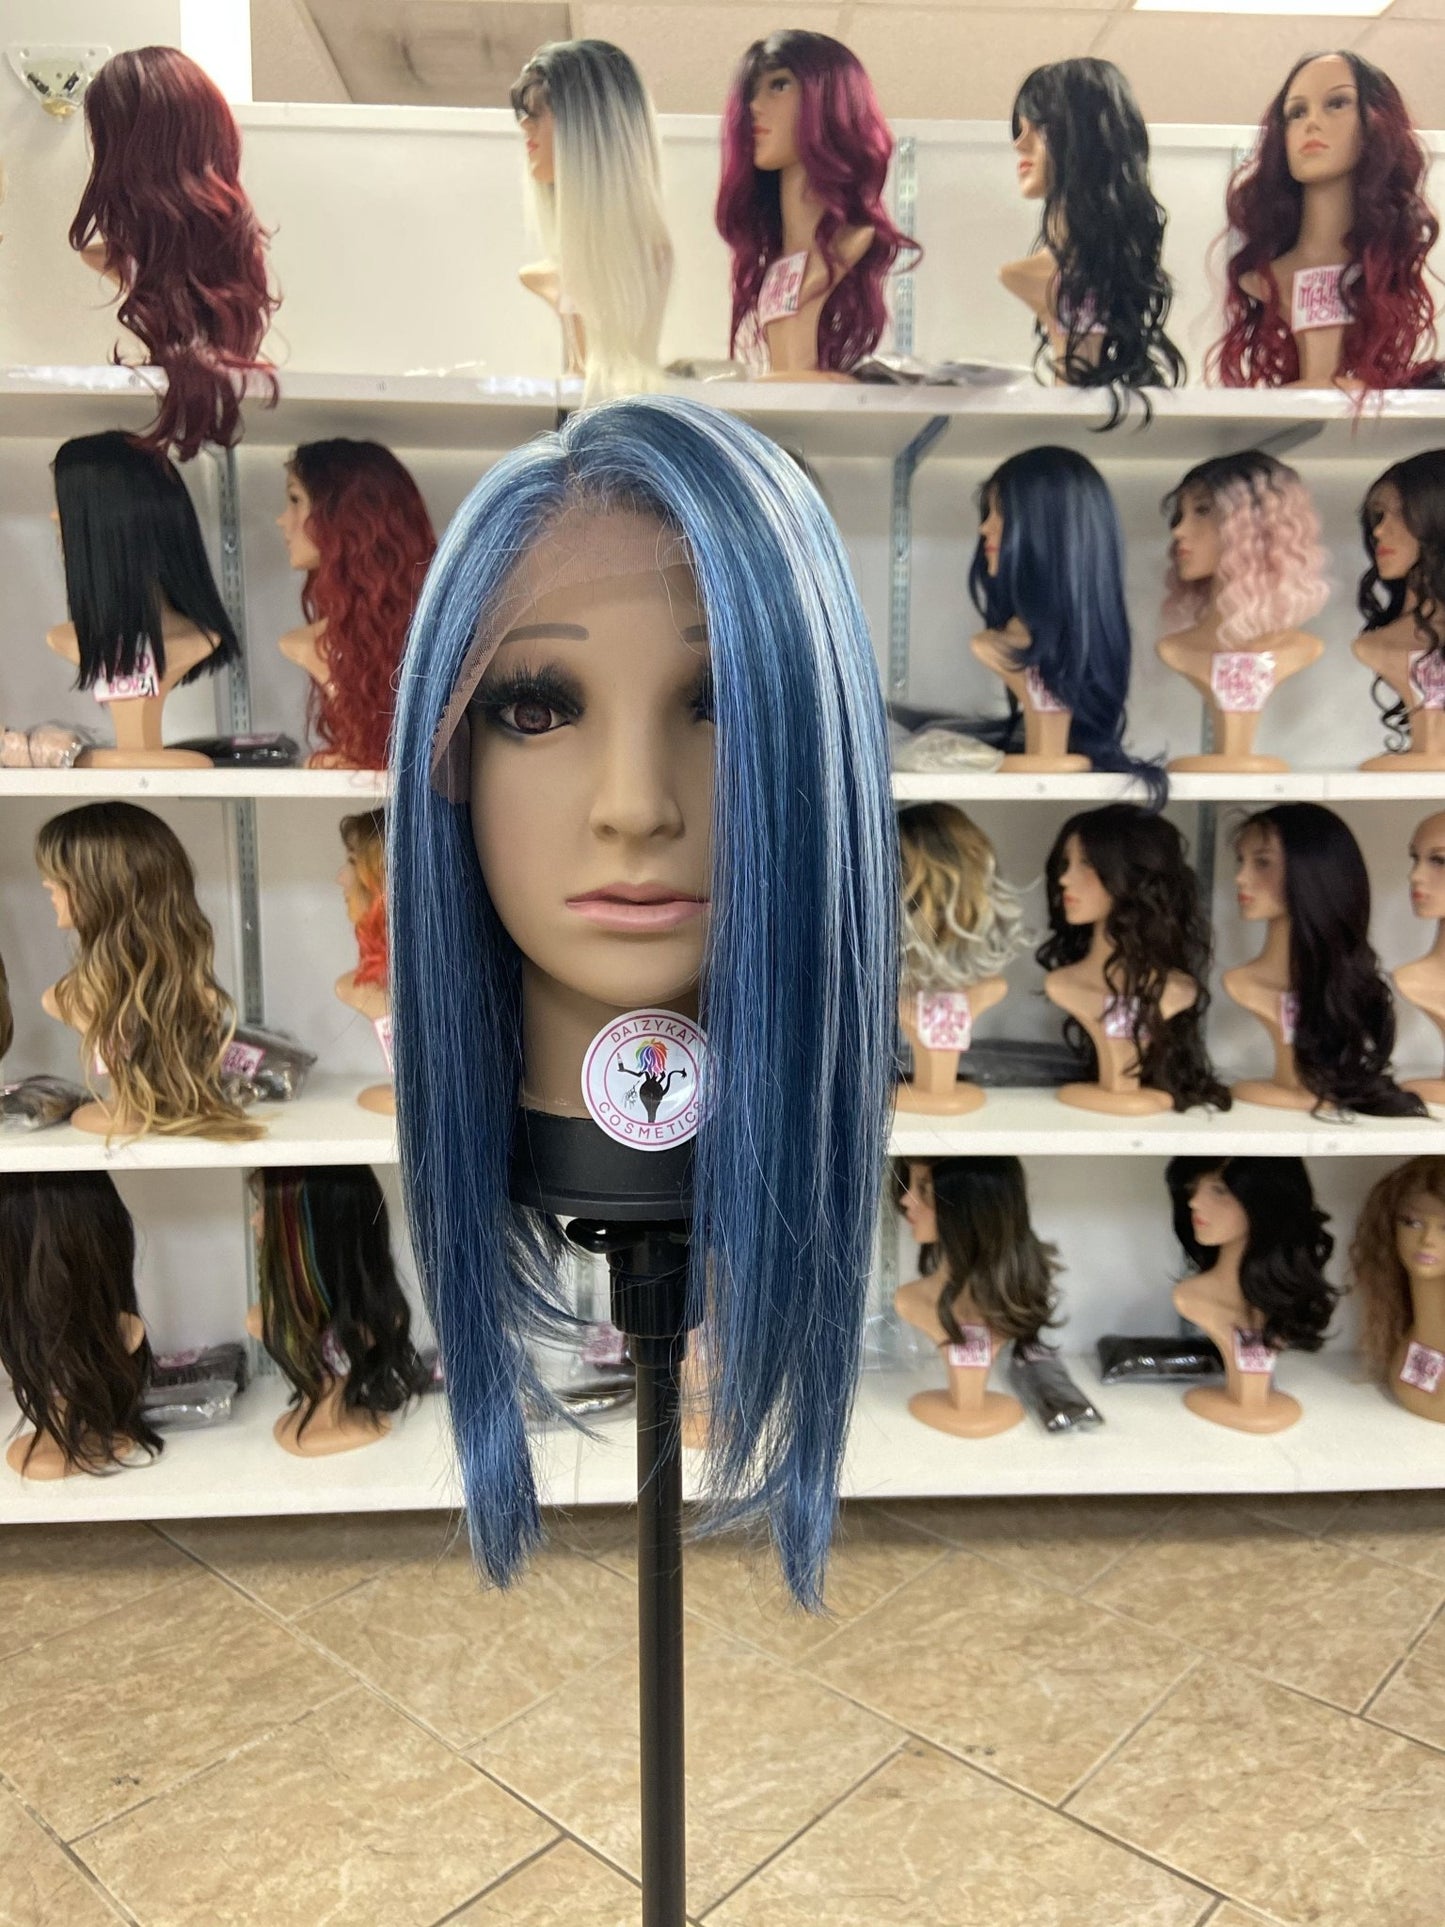 200 Cora - 13x4 Free Part Lace Front Wig - BLUE - DaizyKat Cosmetics 200 Cora - 13x4 Free Part Lace Front Wig - BLUE DaizyKat Cosmetics Wigs